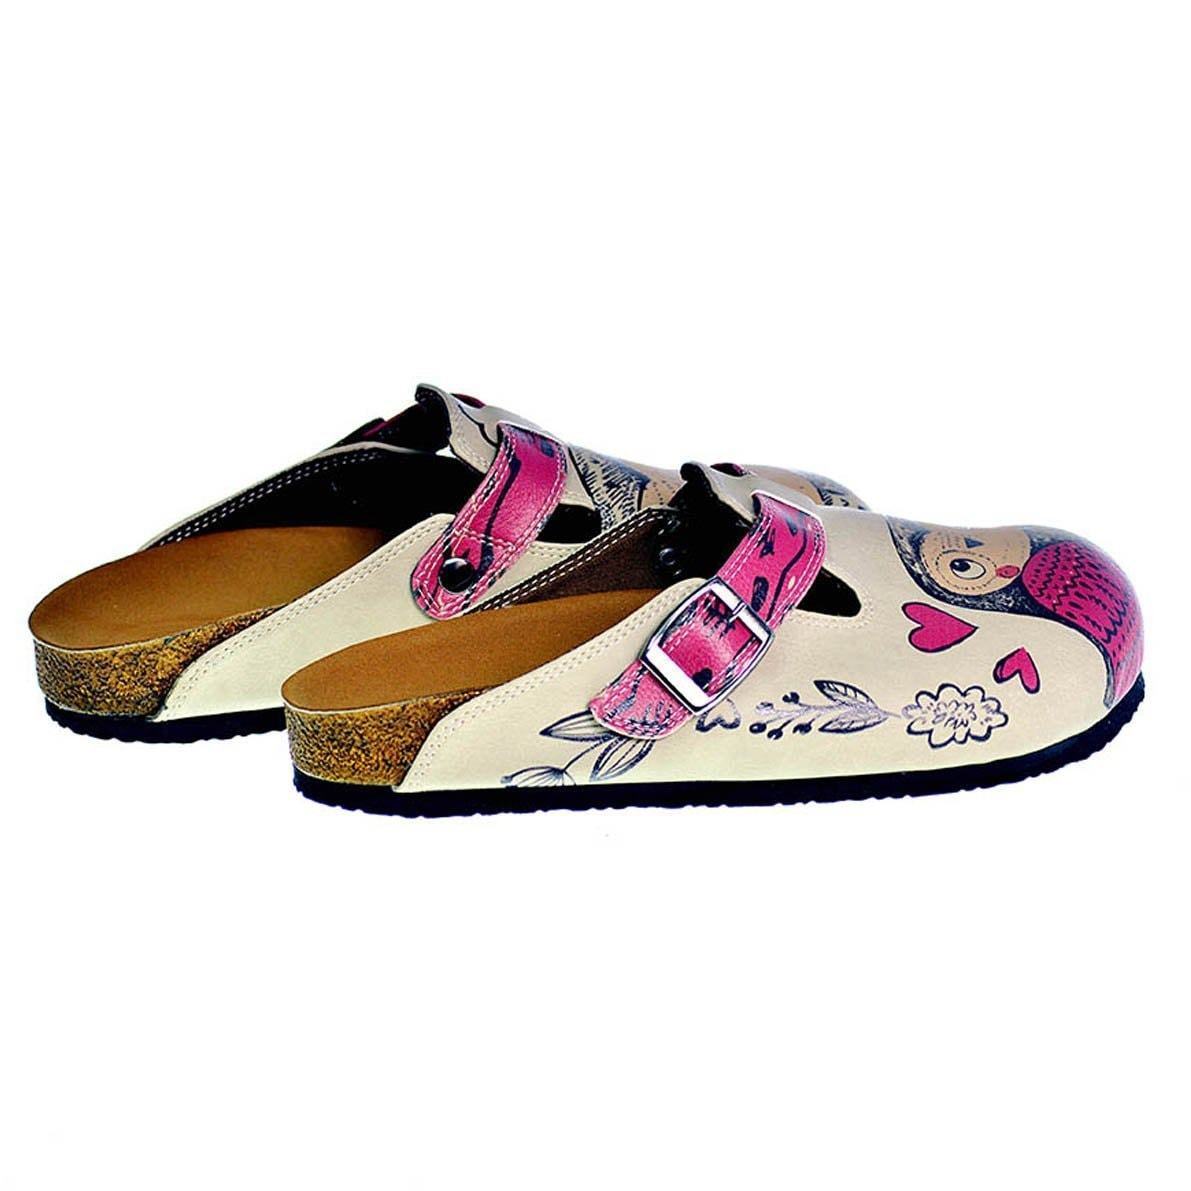 Cream & Pink Love Owls Clogs CAL316 - Goby CALCEO Clogs 